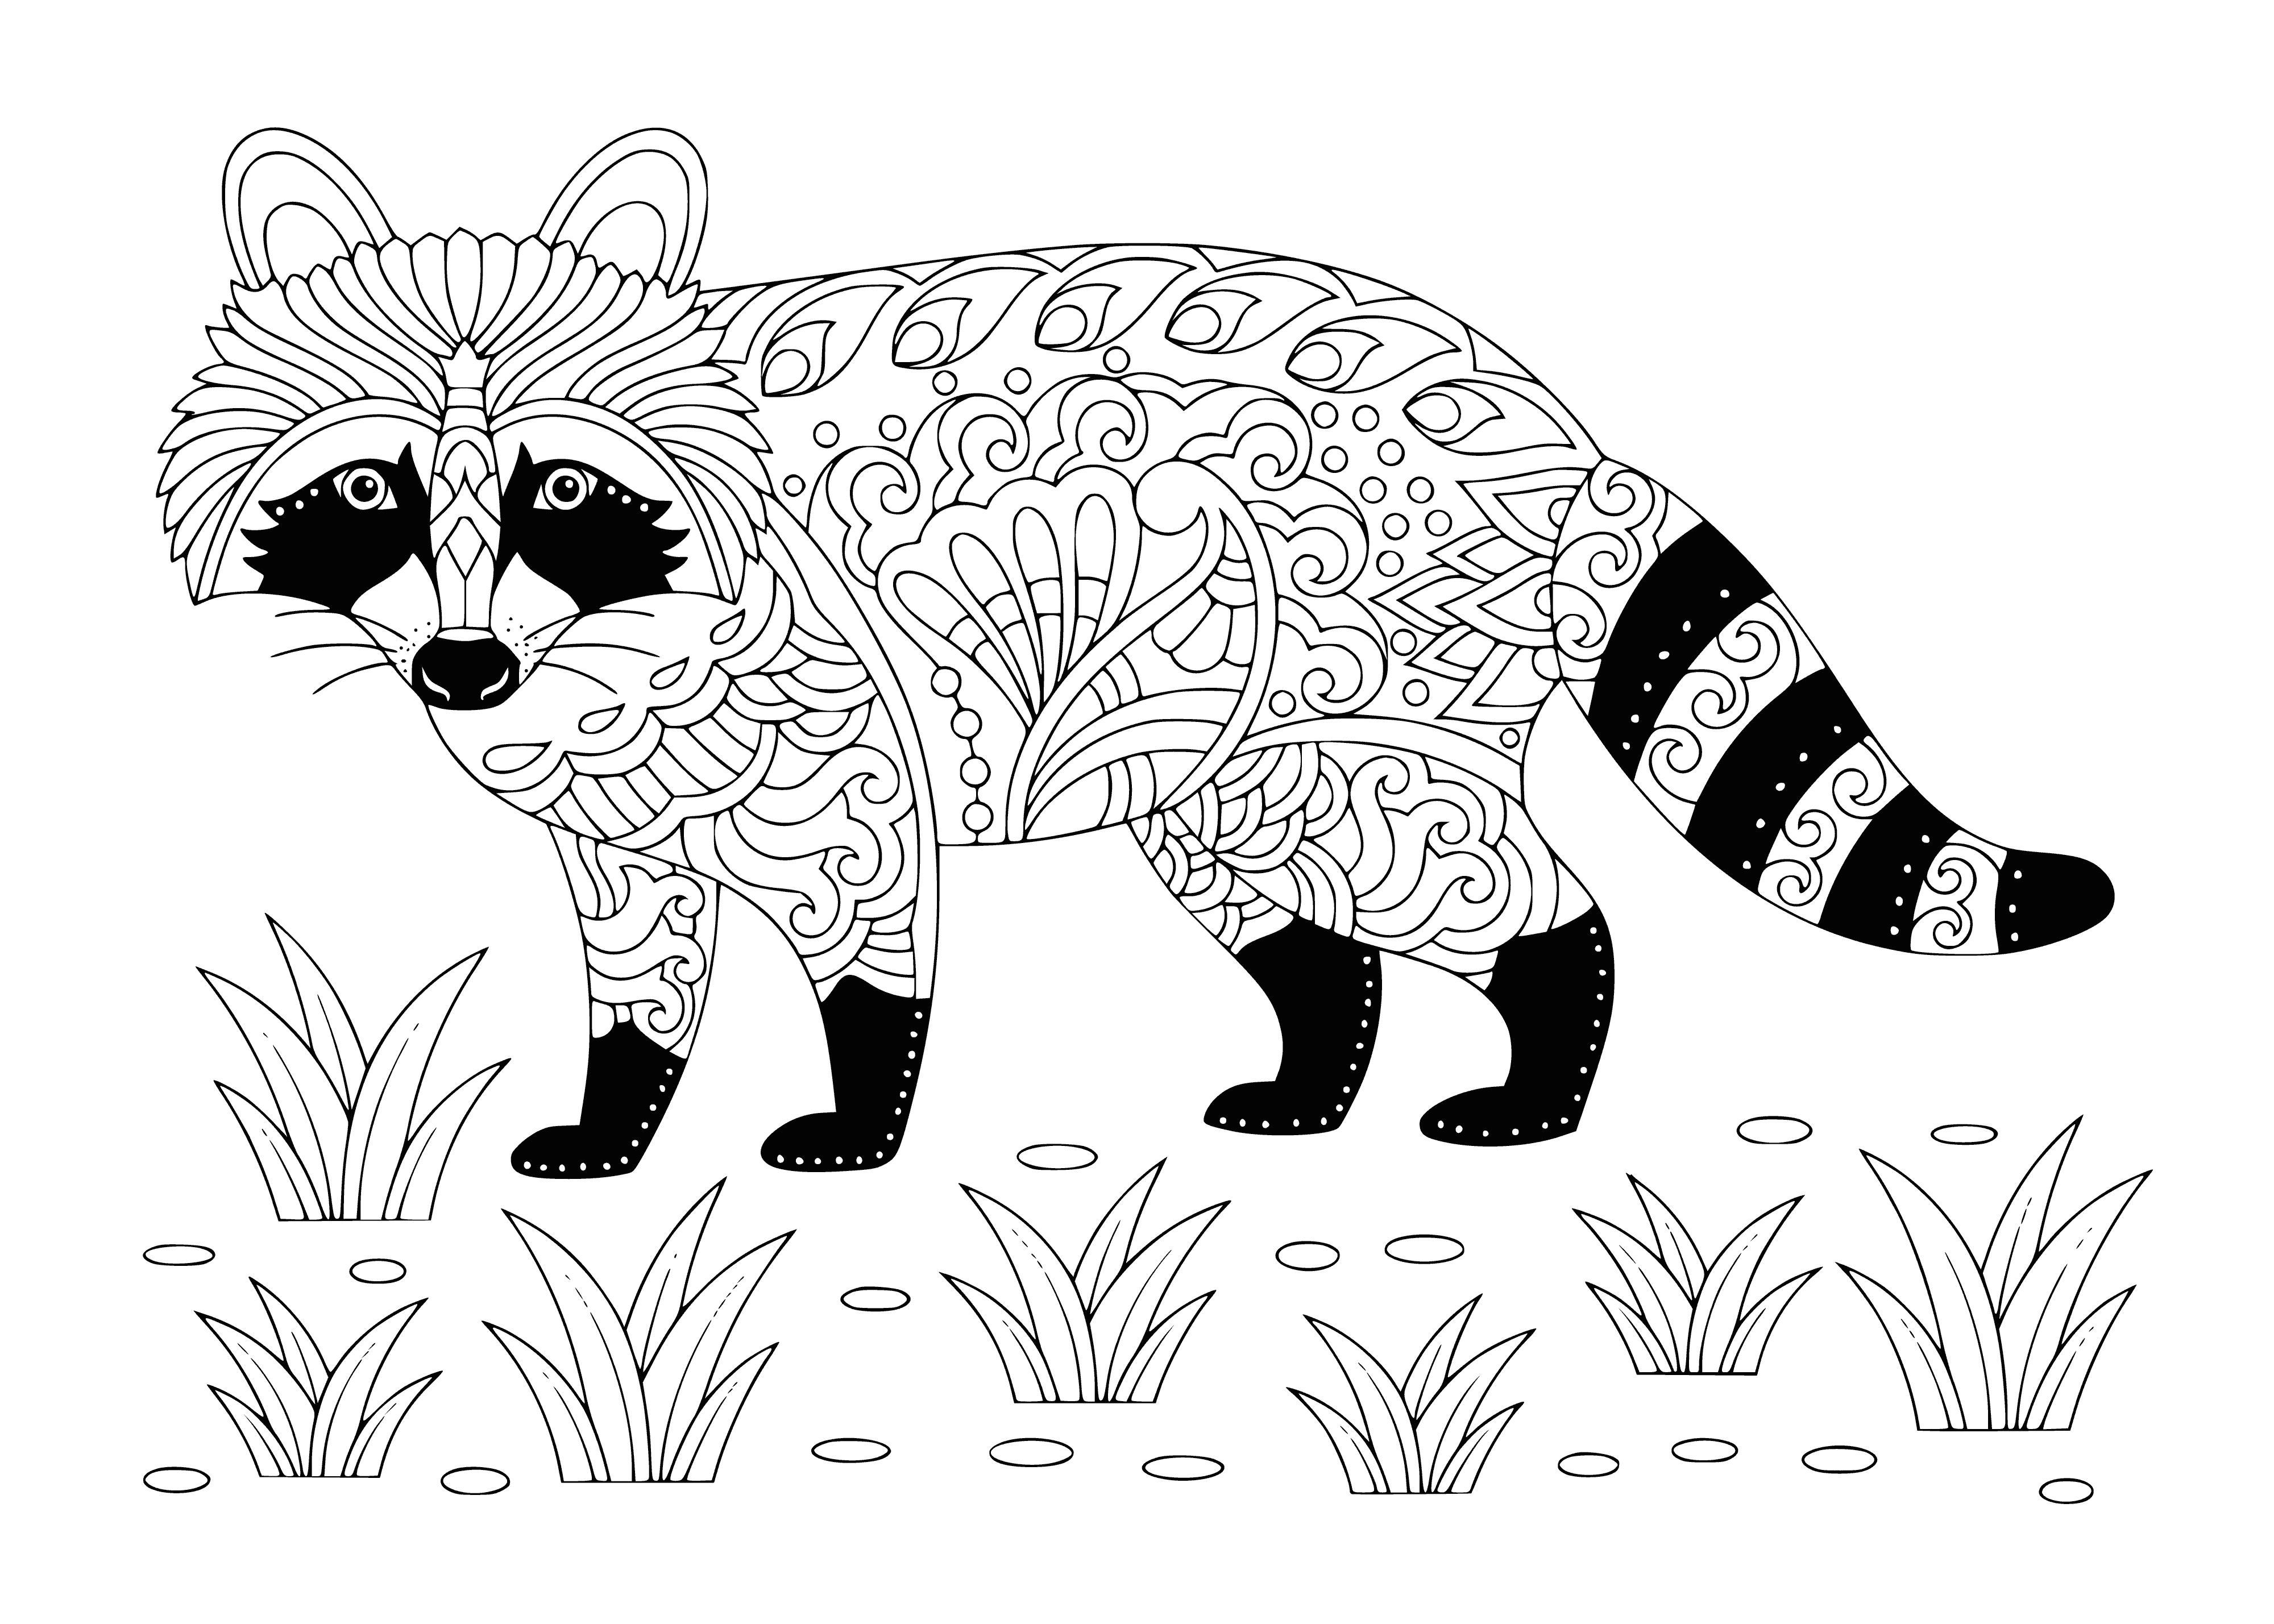 coloring page: Small, spiky animal (light brown fur) surrounded by colored shapes & patterns.